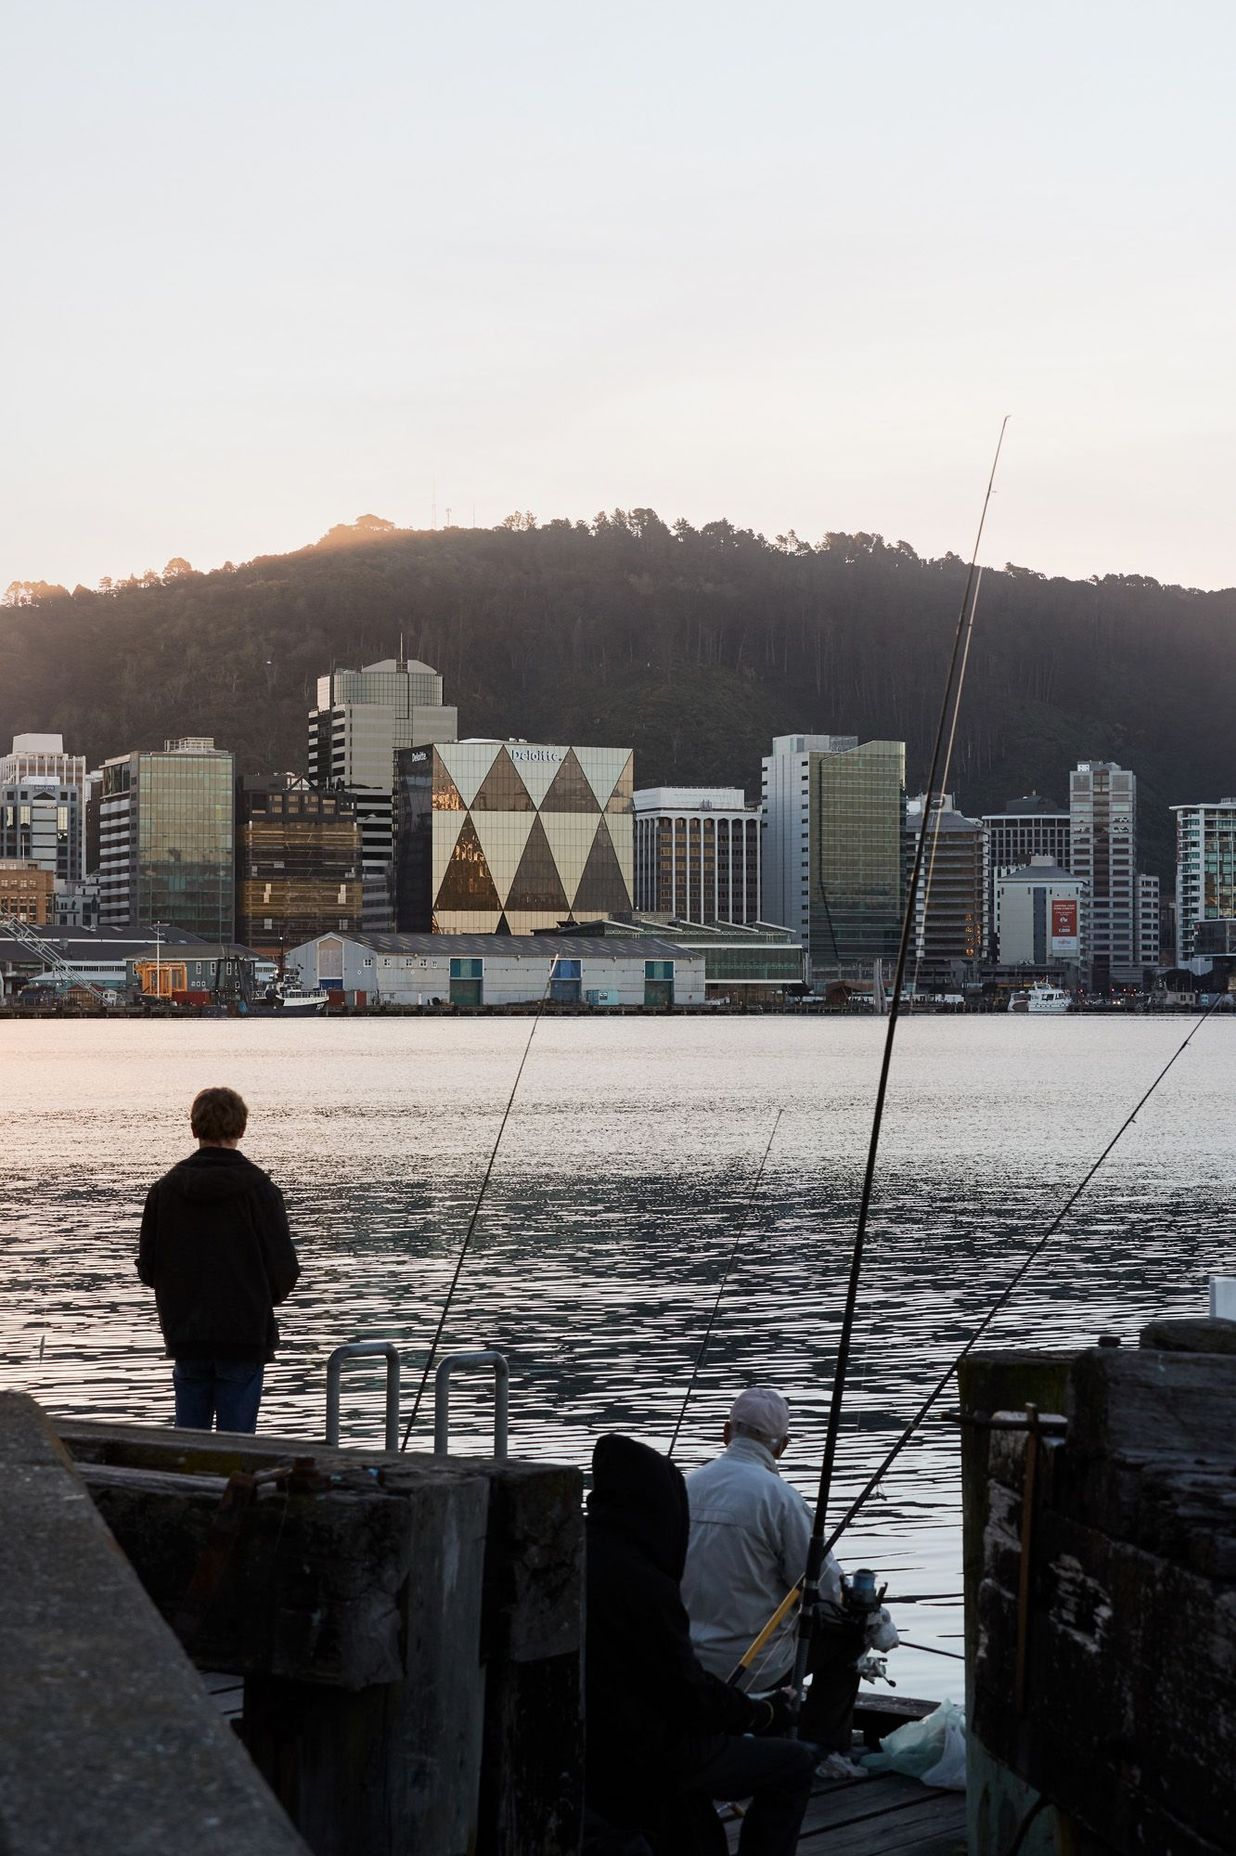 Fishermen enjoy the view from Oriental Parade of the XXCQ building, which reflects the afternoon sun.